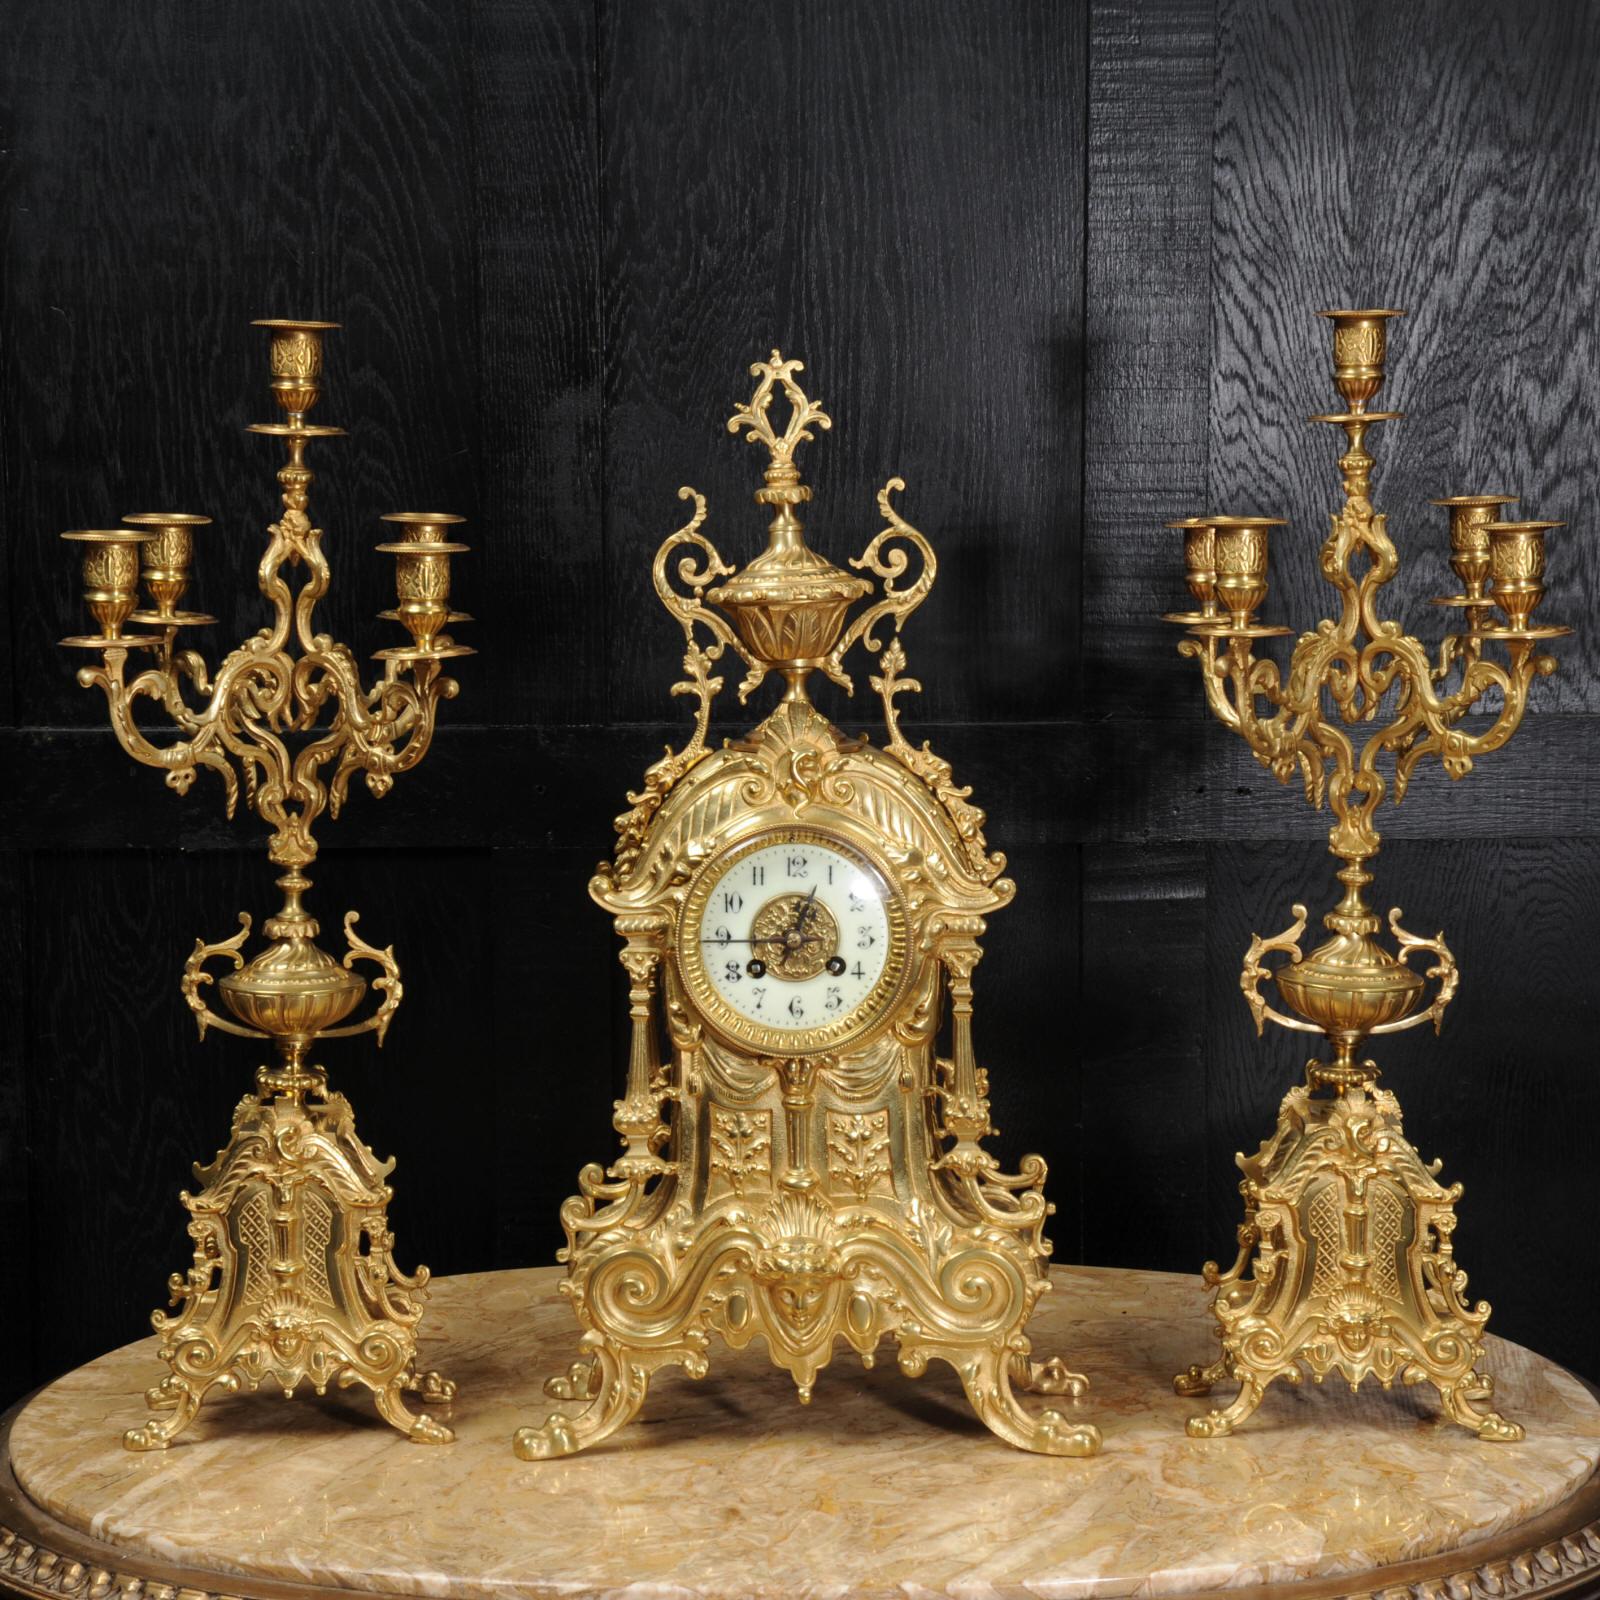 A beautiful original antique French clock set by Louis Japy. It is Baroque in style with bold scrolls, a goddess mask, acanthus urn and paw feet. Candelabra are conforming in style with five lights.

The dial is porcelain enamel on copper with